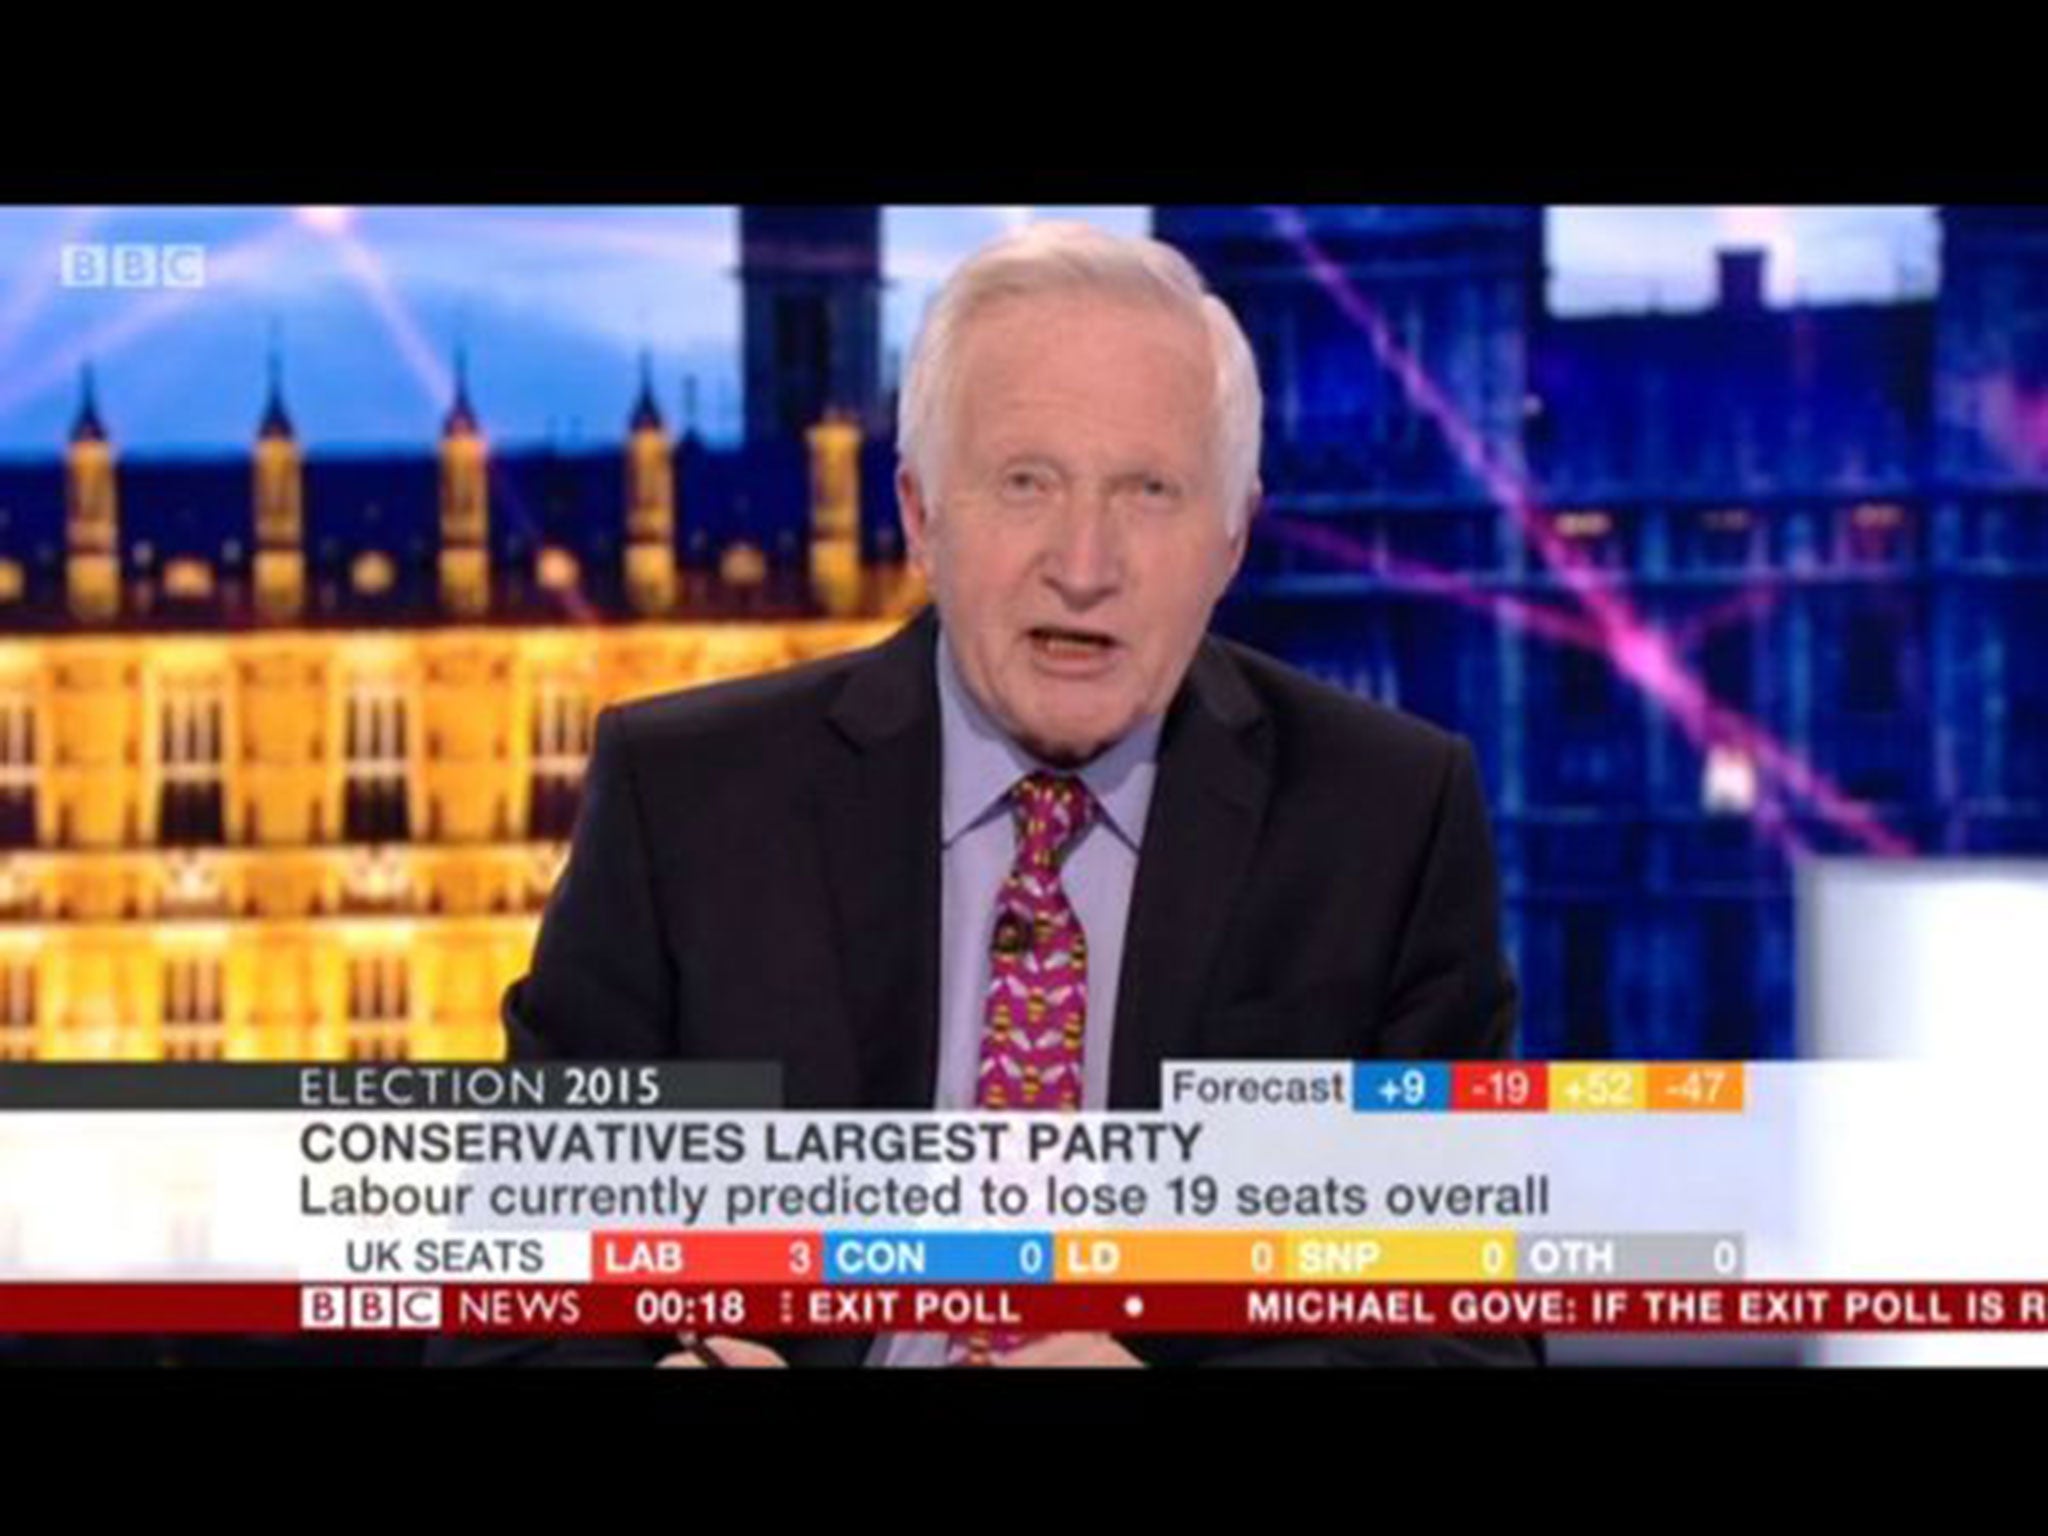 David Dimbleby anchoring the BBC's coverage